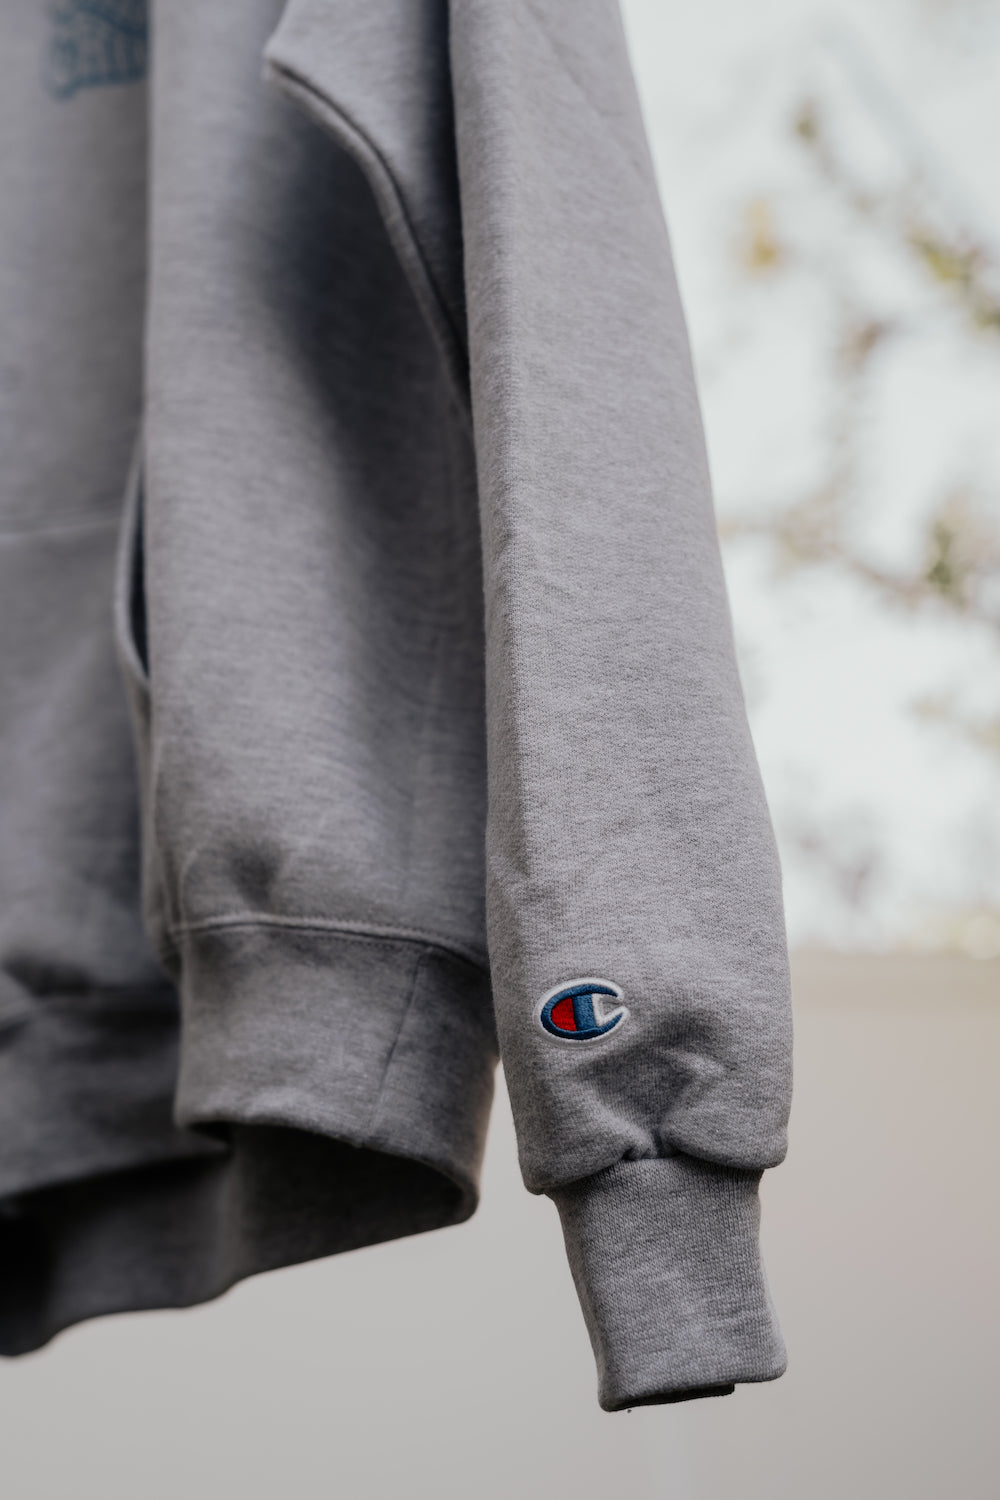 CHIEF X CHAMPION ECO® AUTHENTIC HOODIE (GREY) – CHIEF BAND